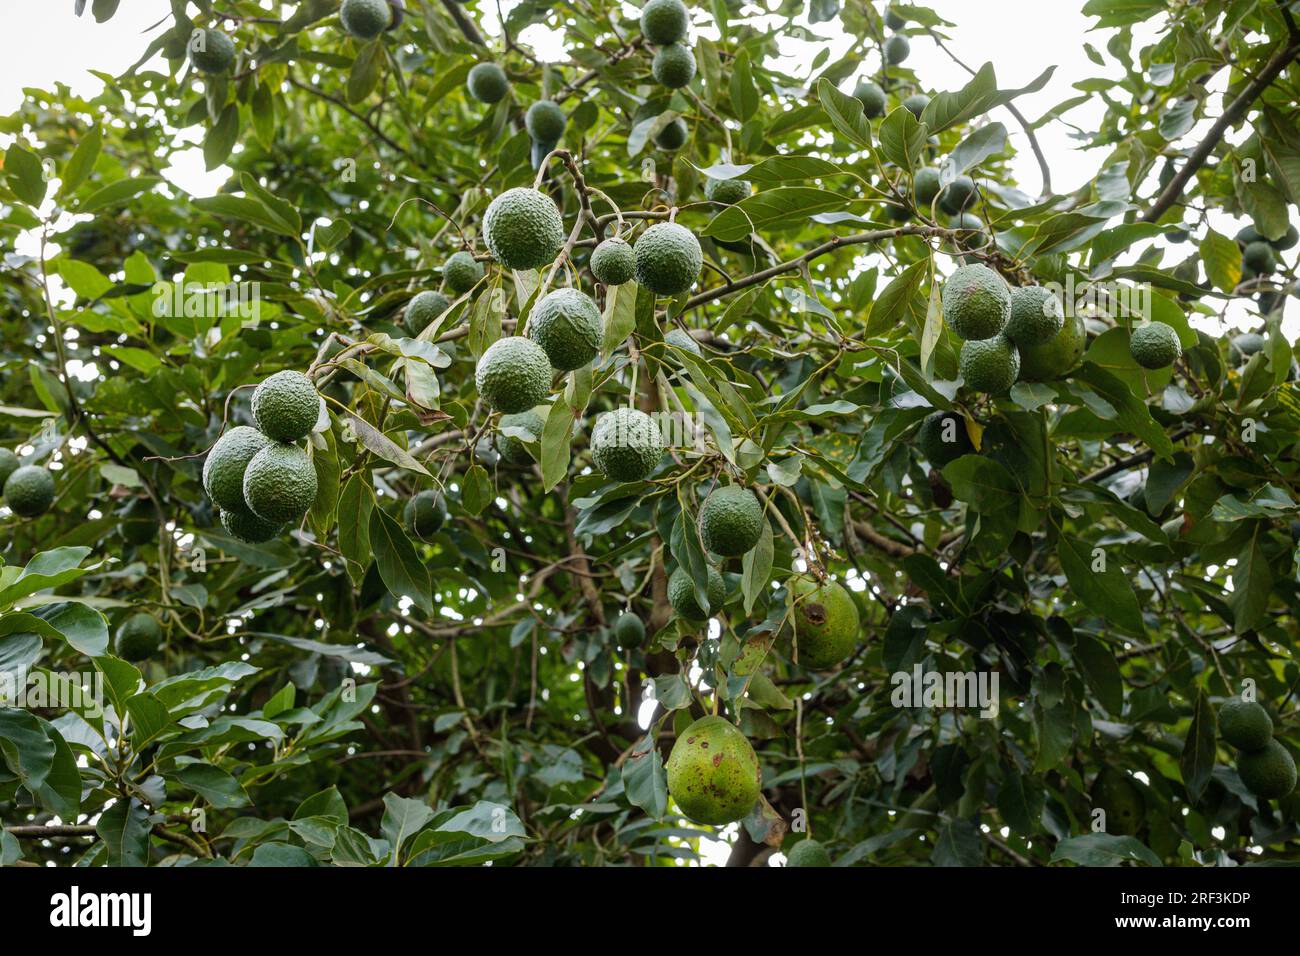 Kenyan Avocado farming plants trees on the farm. Hass avocado is a variety of avocados with green, bumpy skin. It was first grown and sold by a Southe Stock Photo